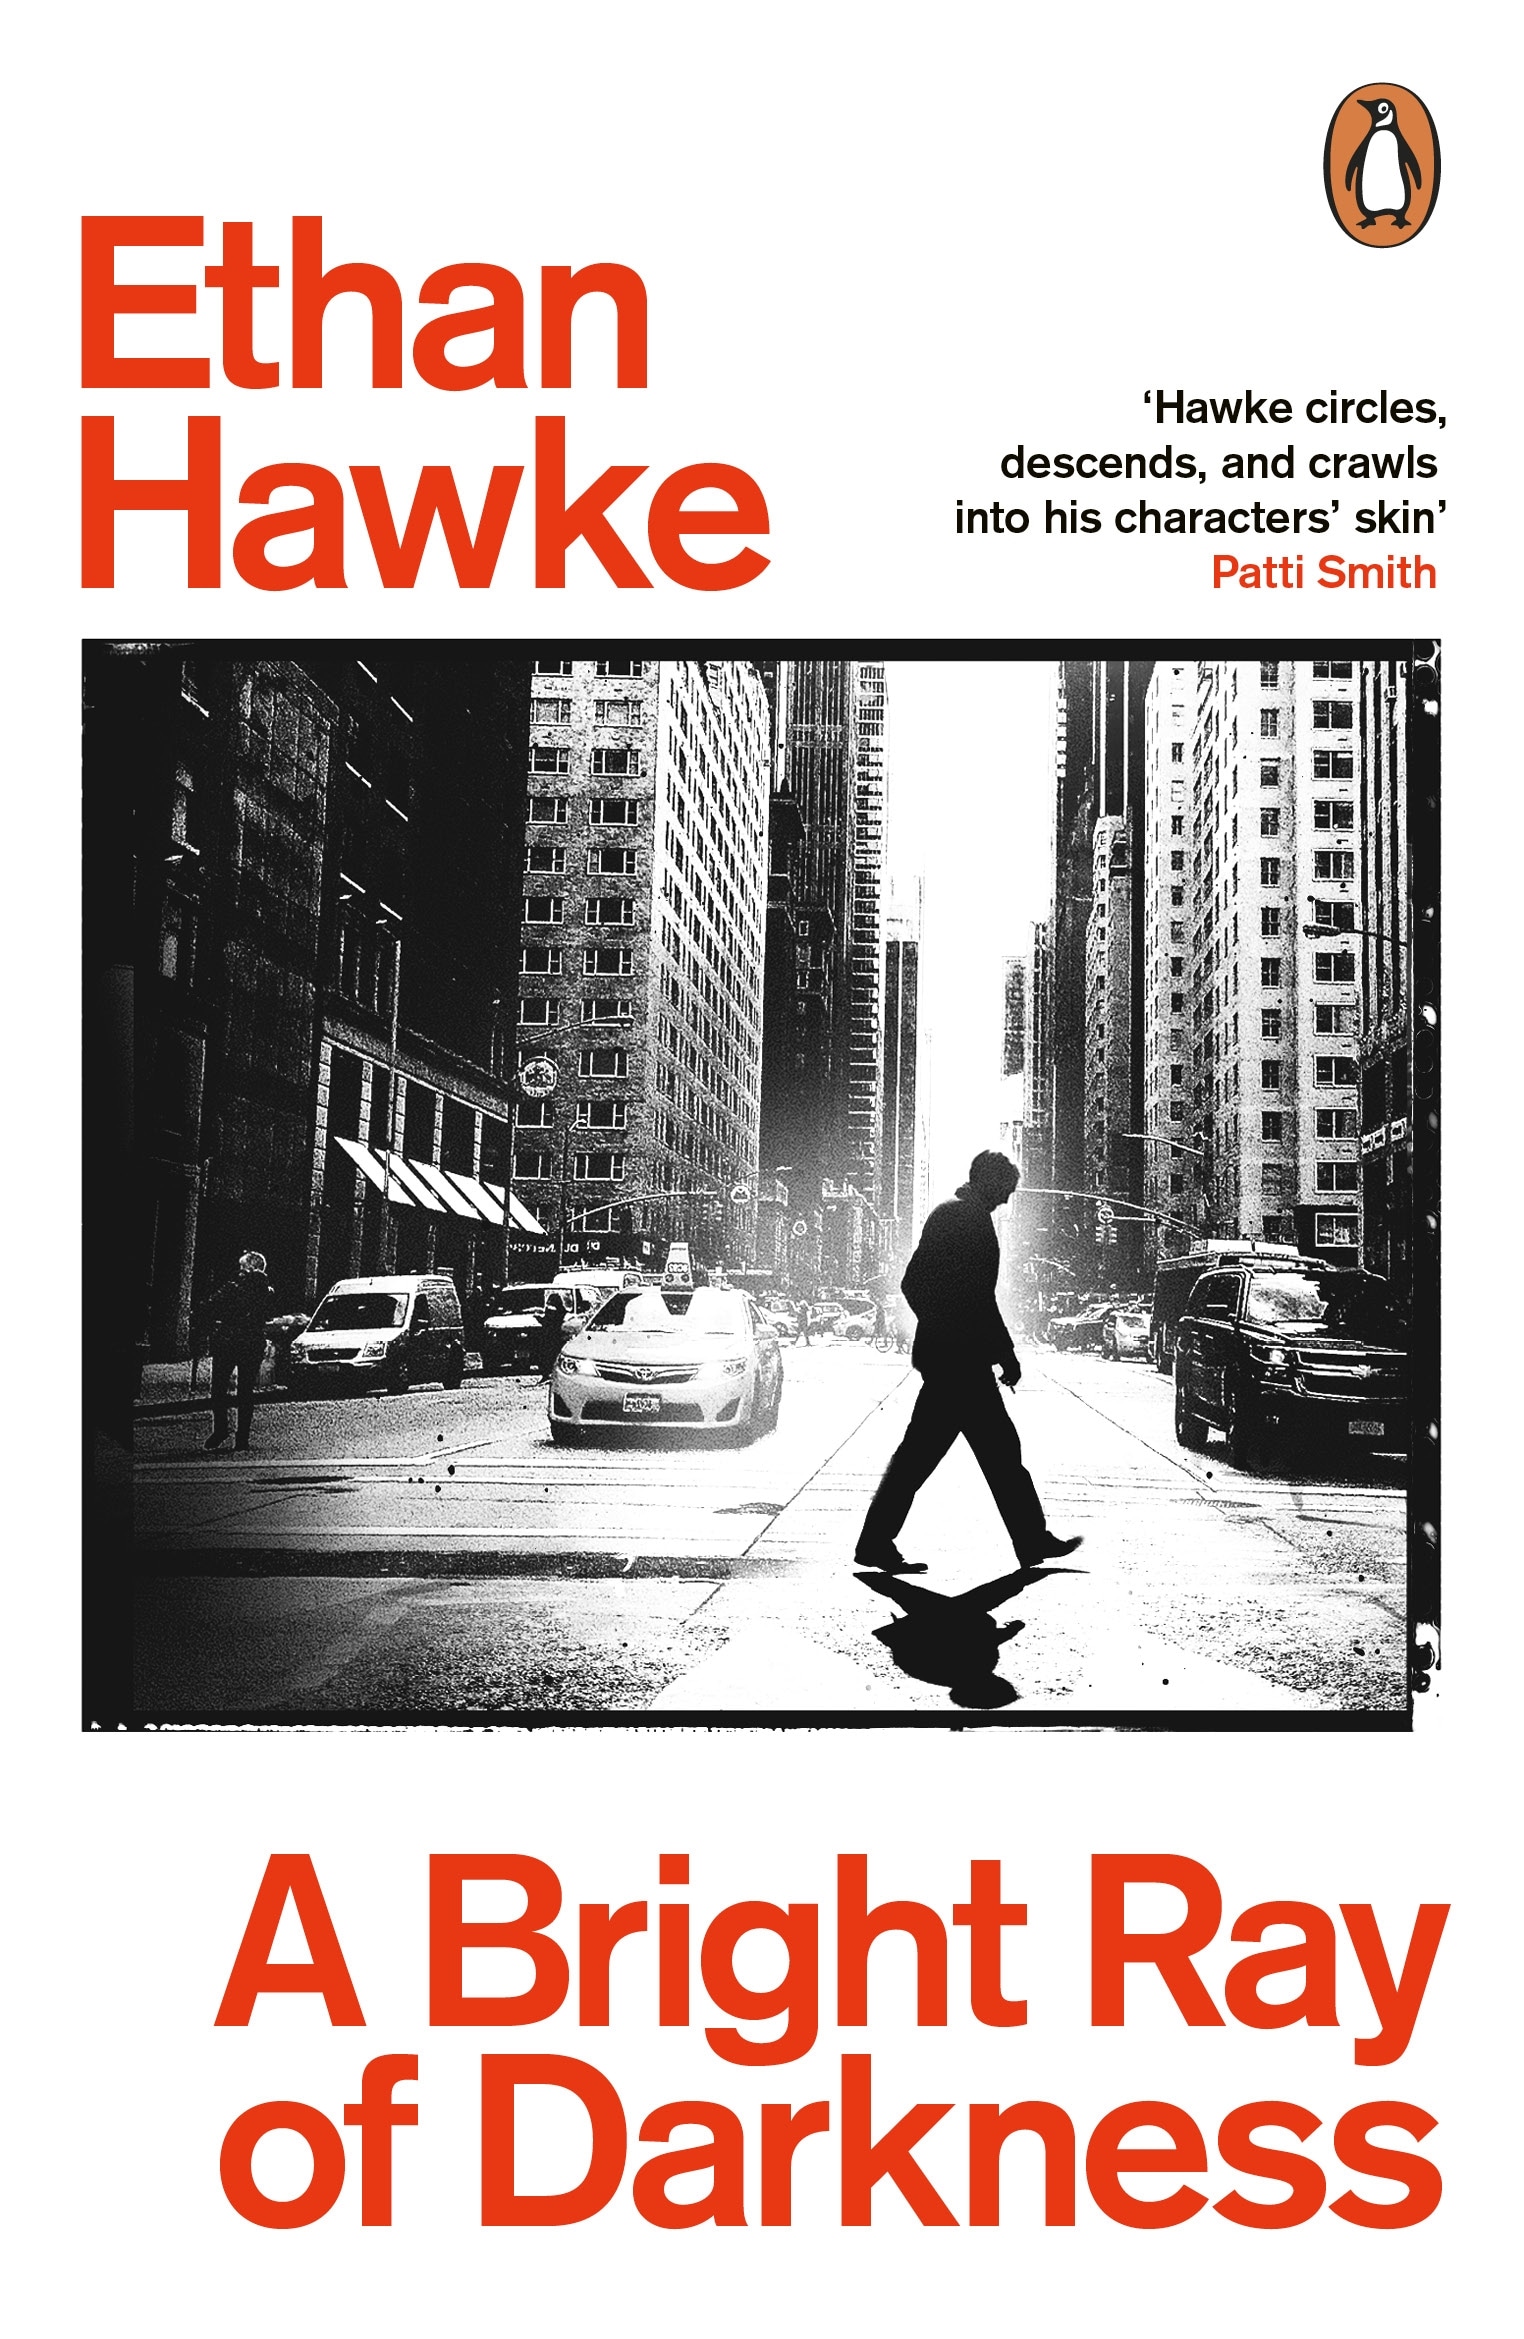 Book “A Bright Ray of Darkness” by Ethan Hawke — February 10, 2022